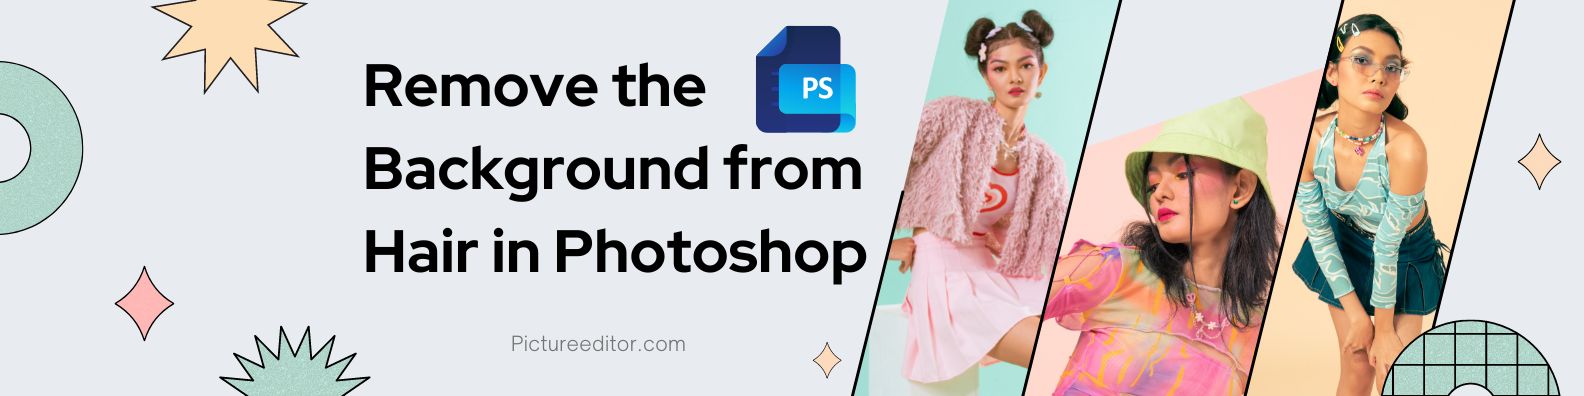 Remove the Background from Hair in Photoshop